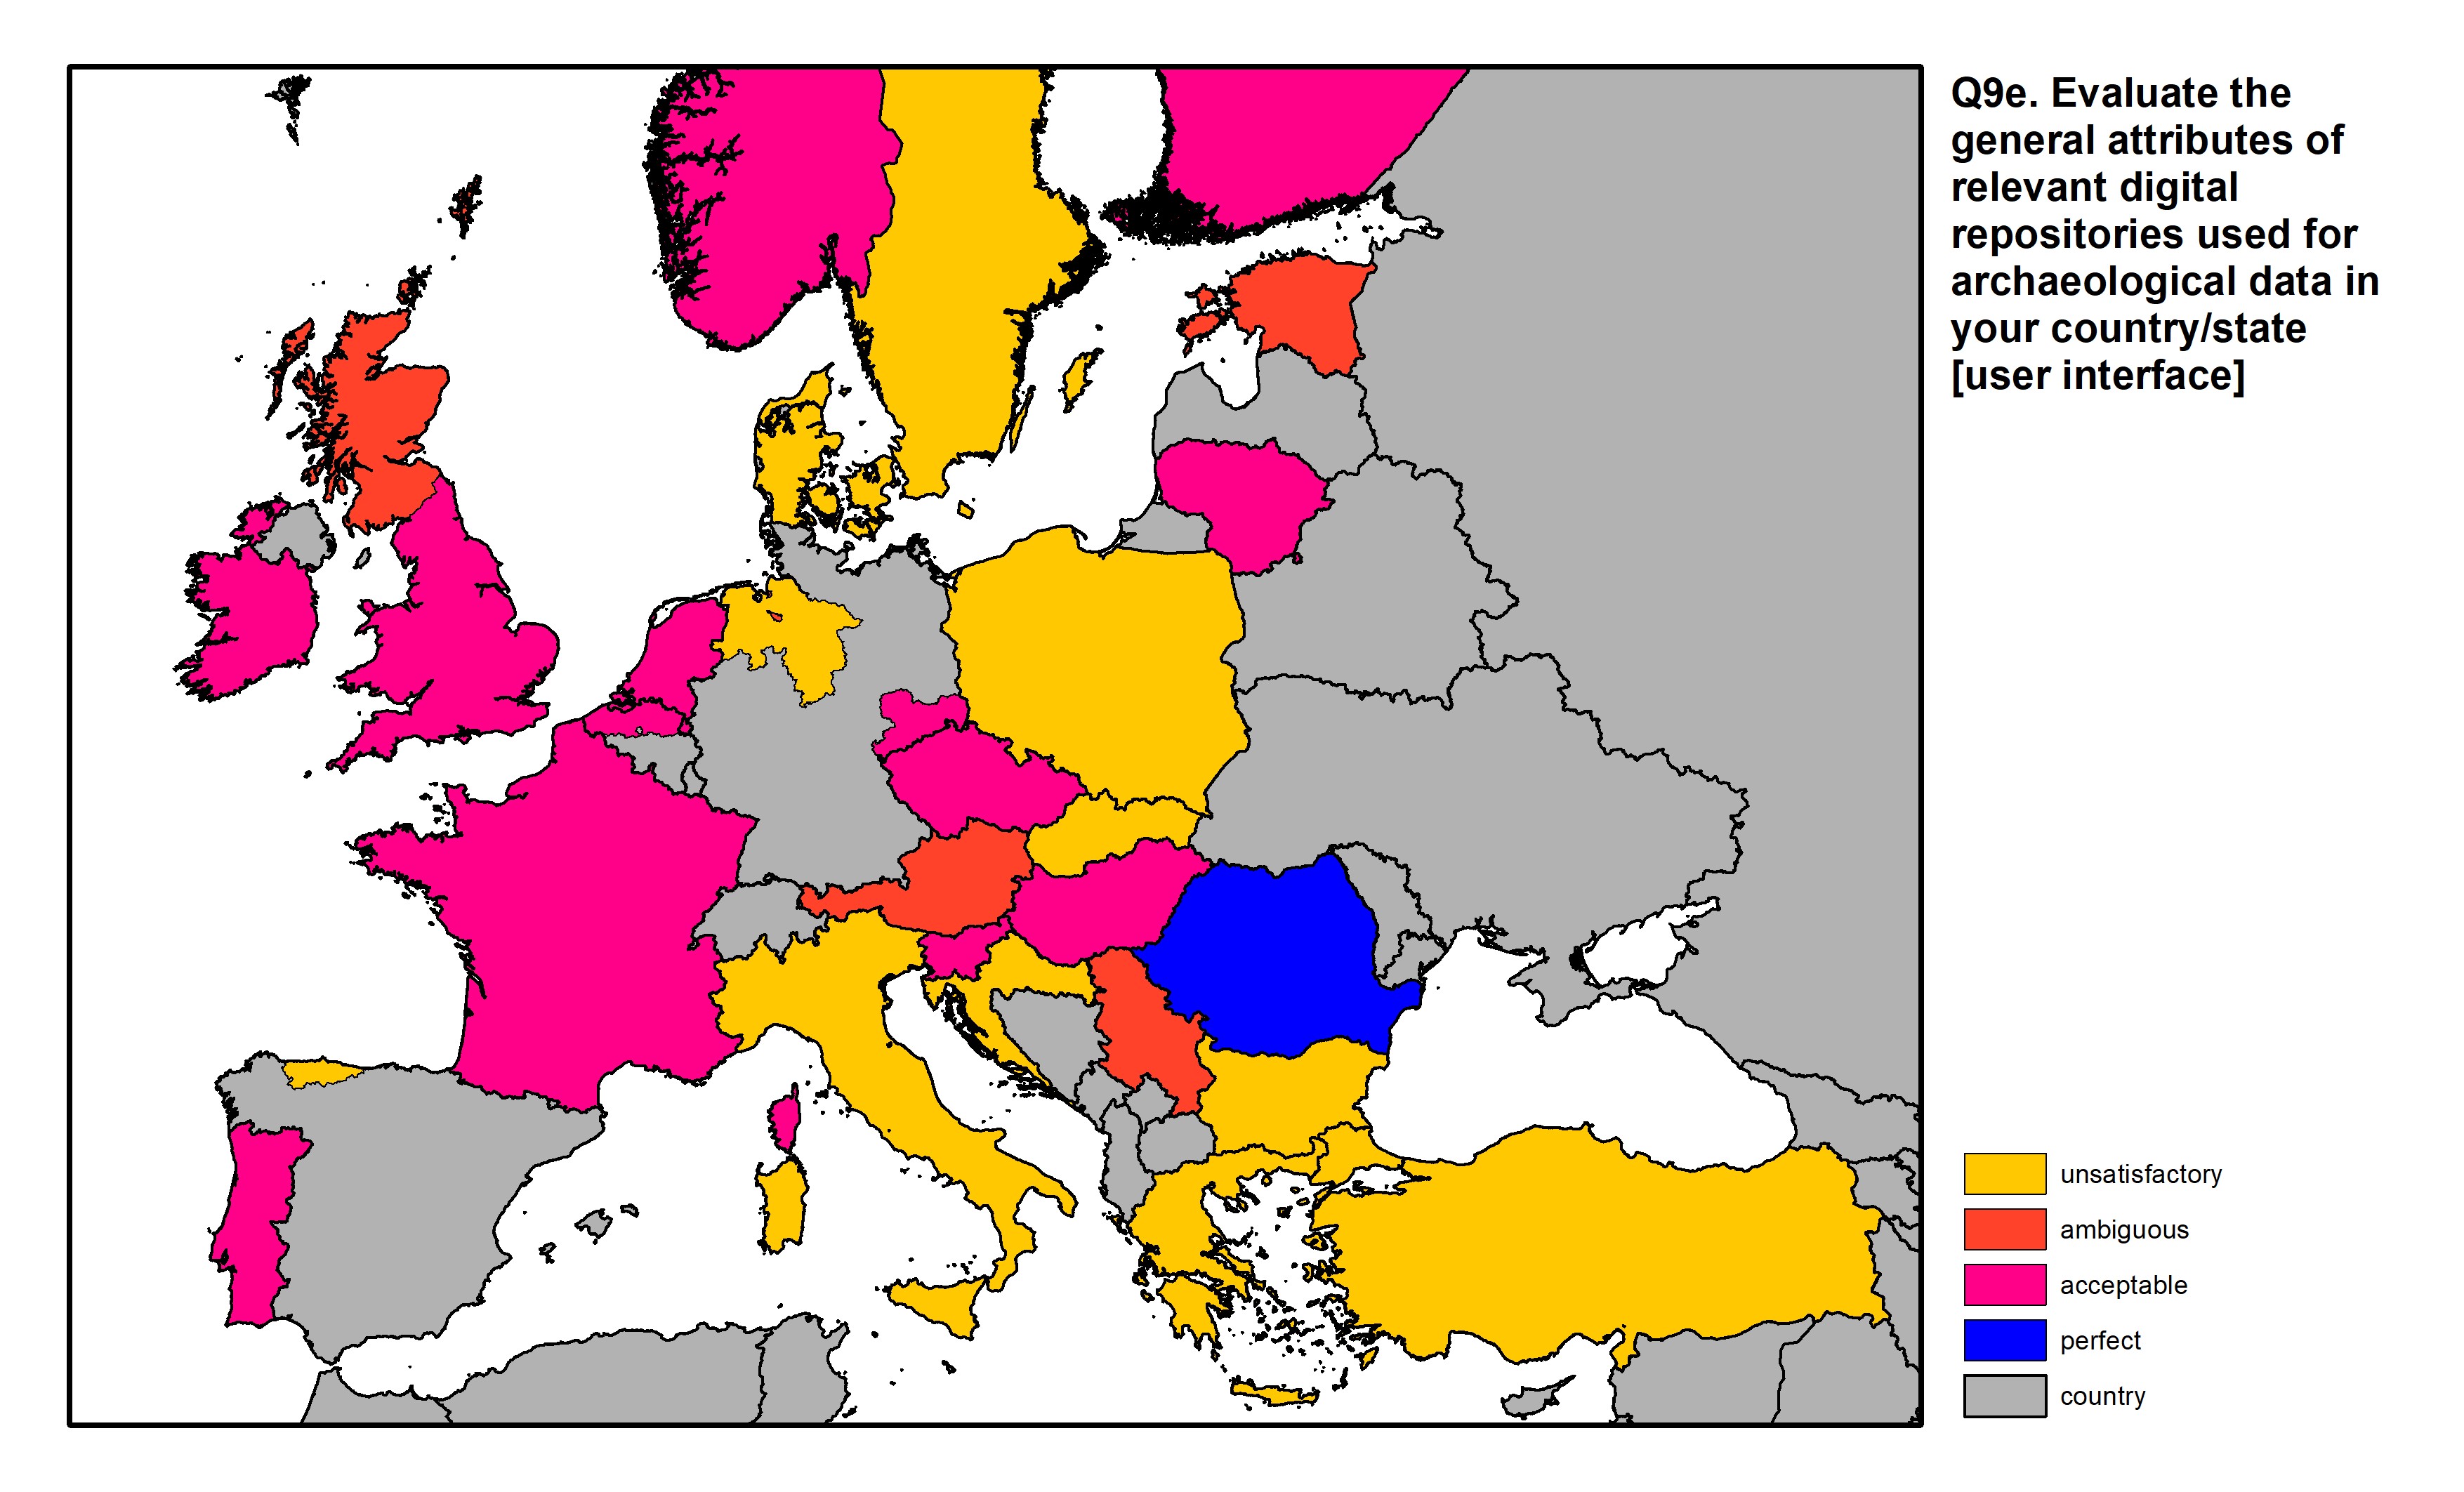 Figure 31: a map of Europe showing countries and regions in colour based on response rates to the survey question.